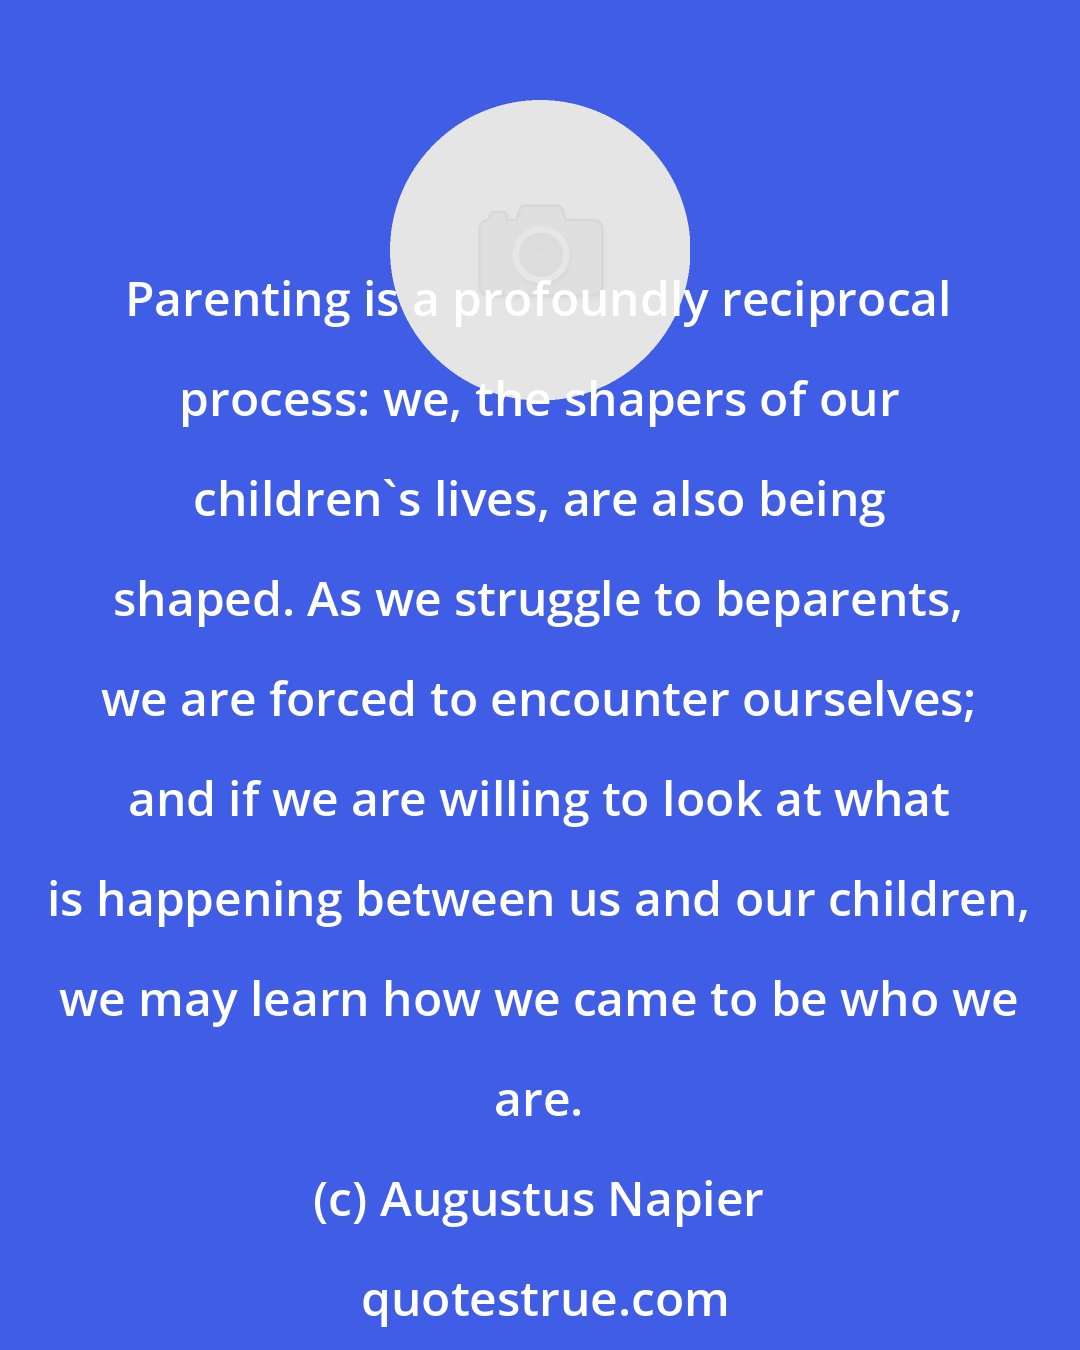 Augustus Napier: Parenting is a profoundly reciprocal process: we, the shapers of our children's lives, are also being shaped. As we struggle to beparents, we are forced to encounter ourselves; and if we are willing to look at what is happening between us and our children, we may learn how we came to be who we are.